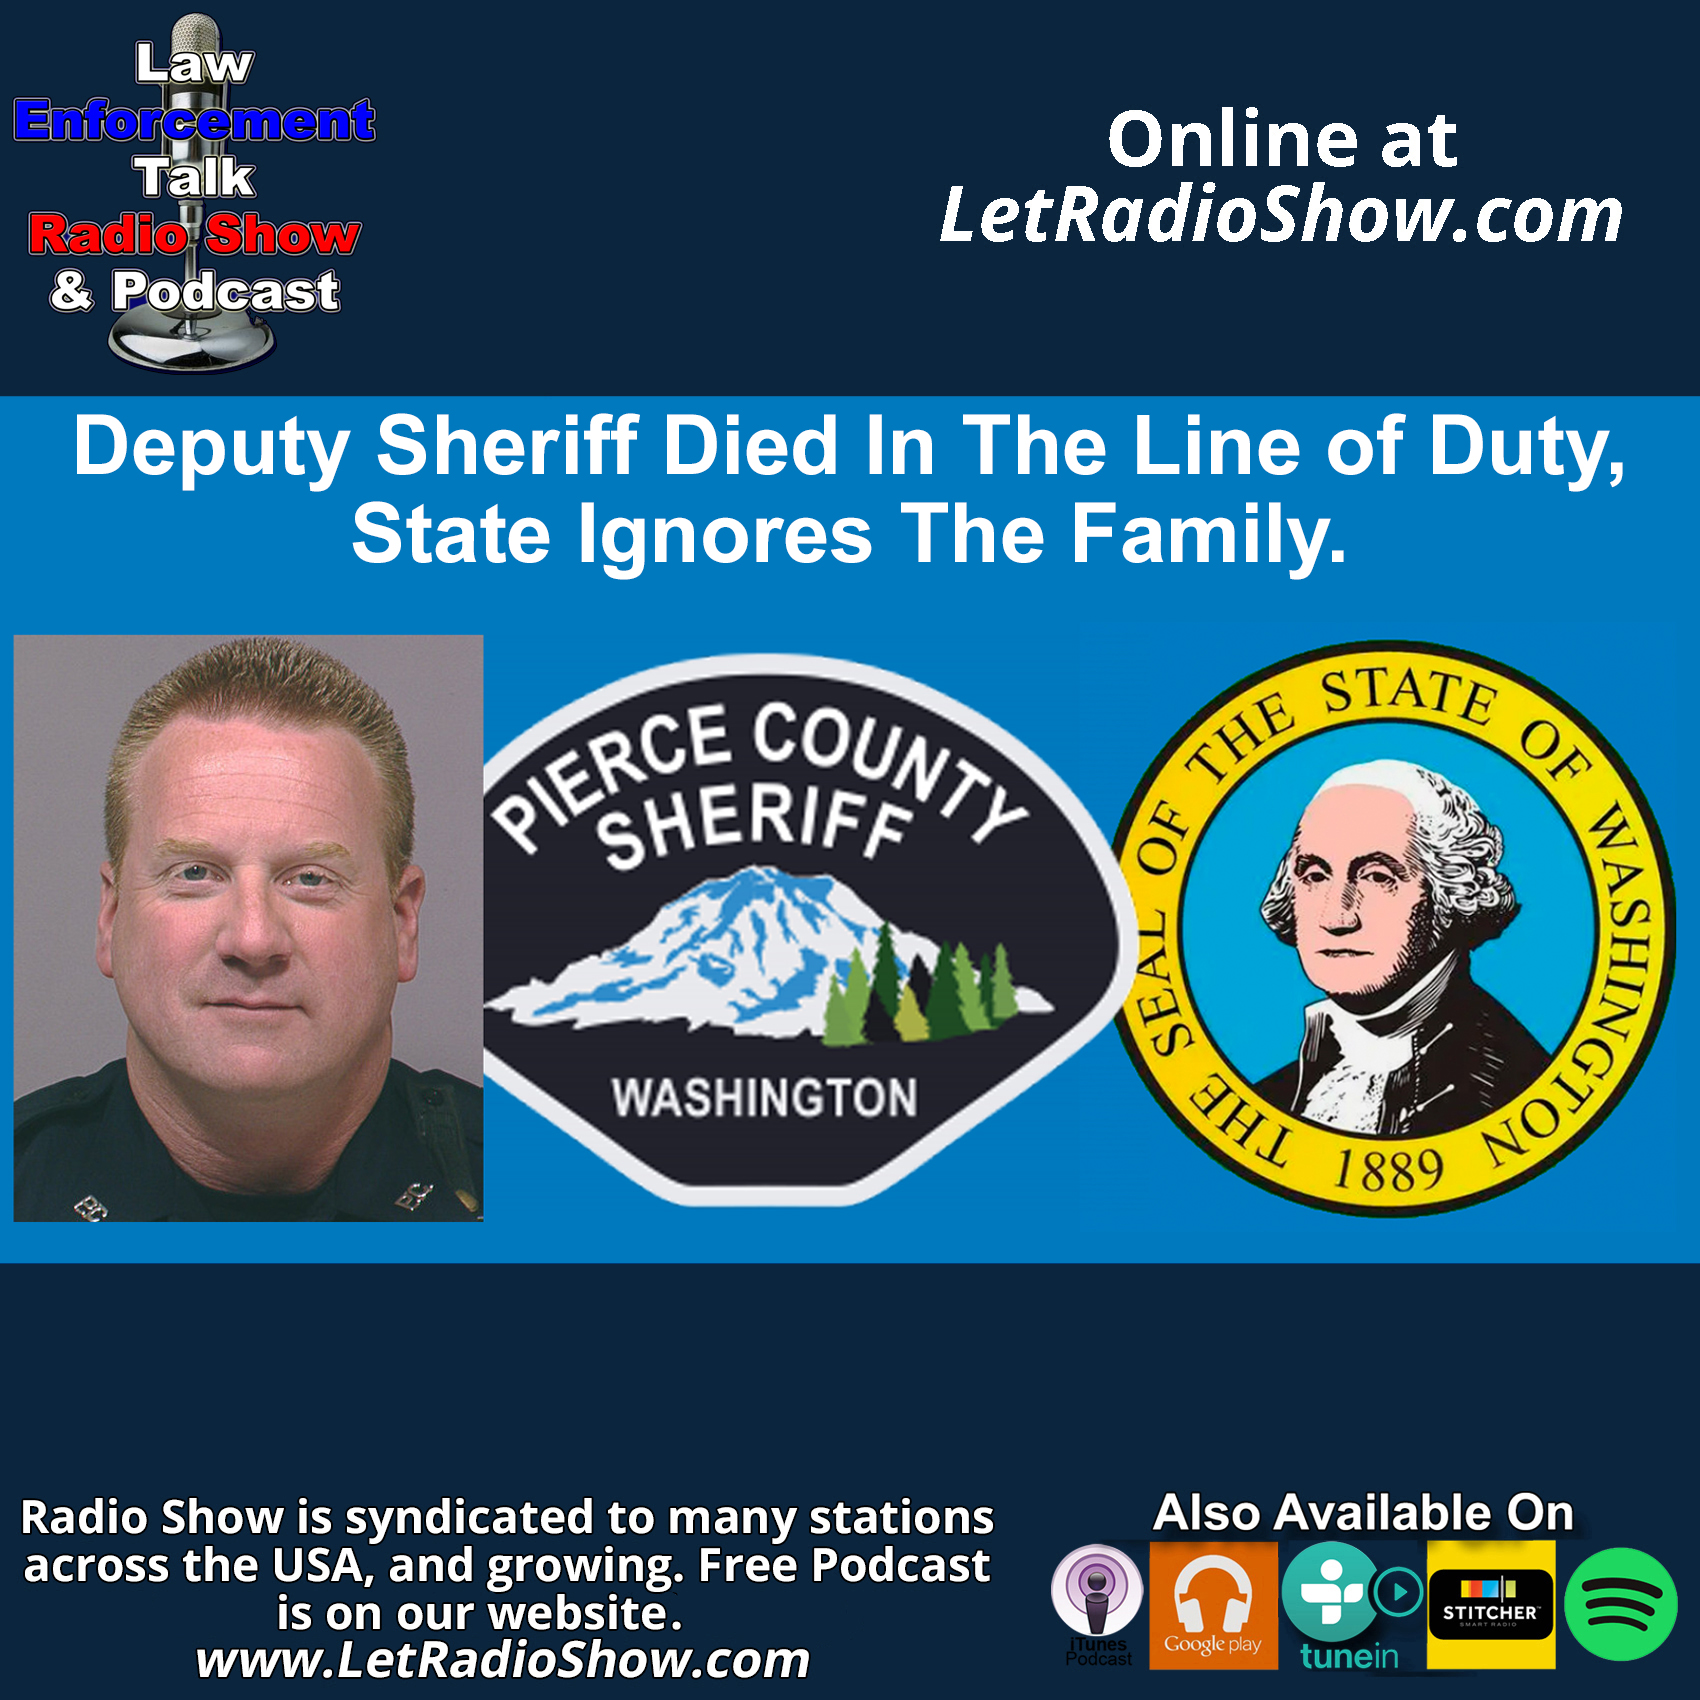 Deputy Sheriff Died, State Ignores The Family.